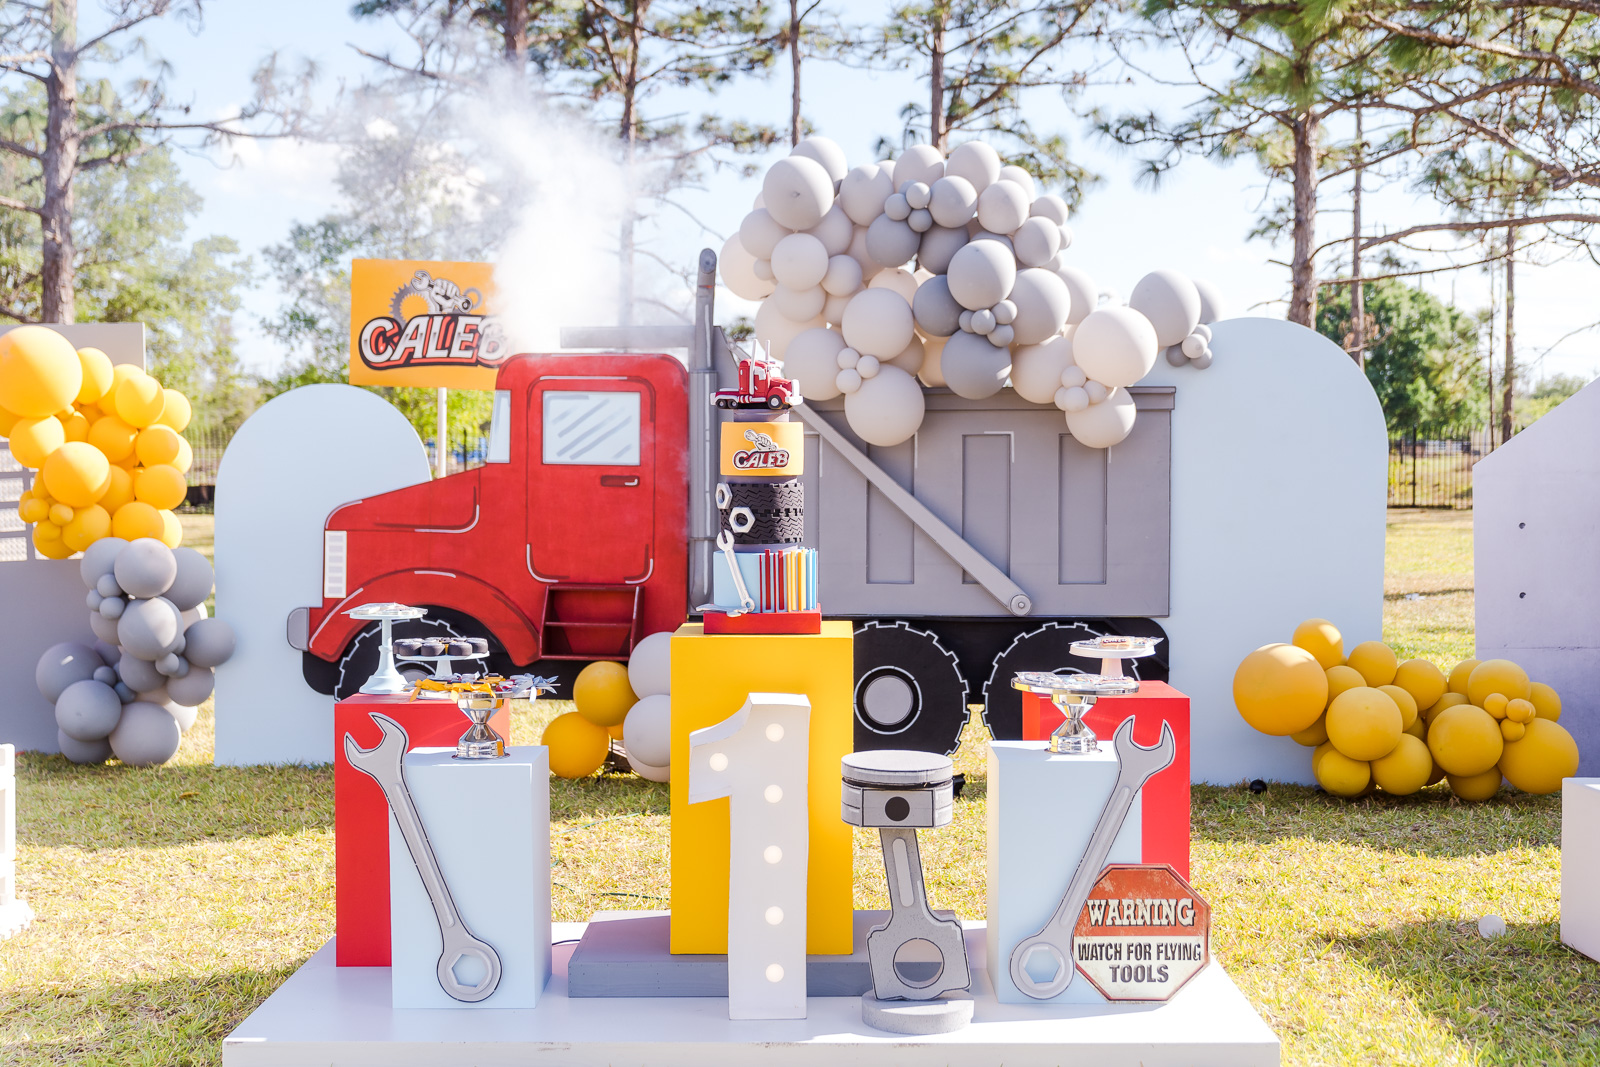 Truck stop themed birthday party for celebrity event in Orlando Florida